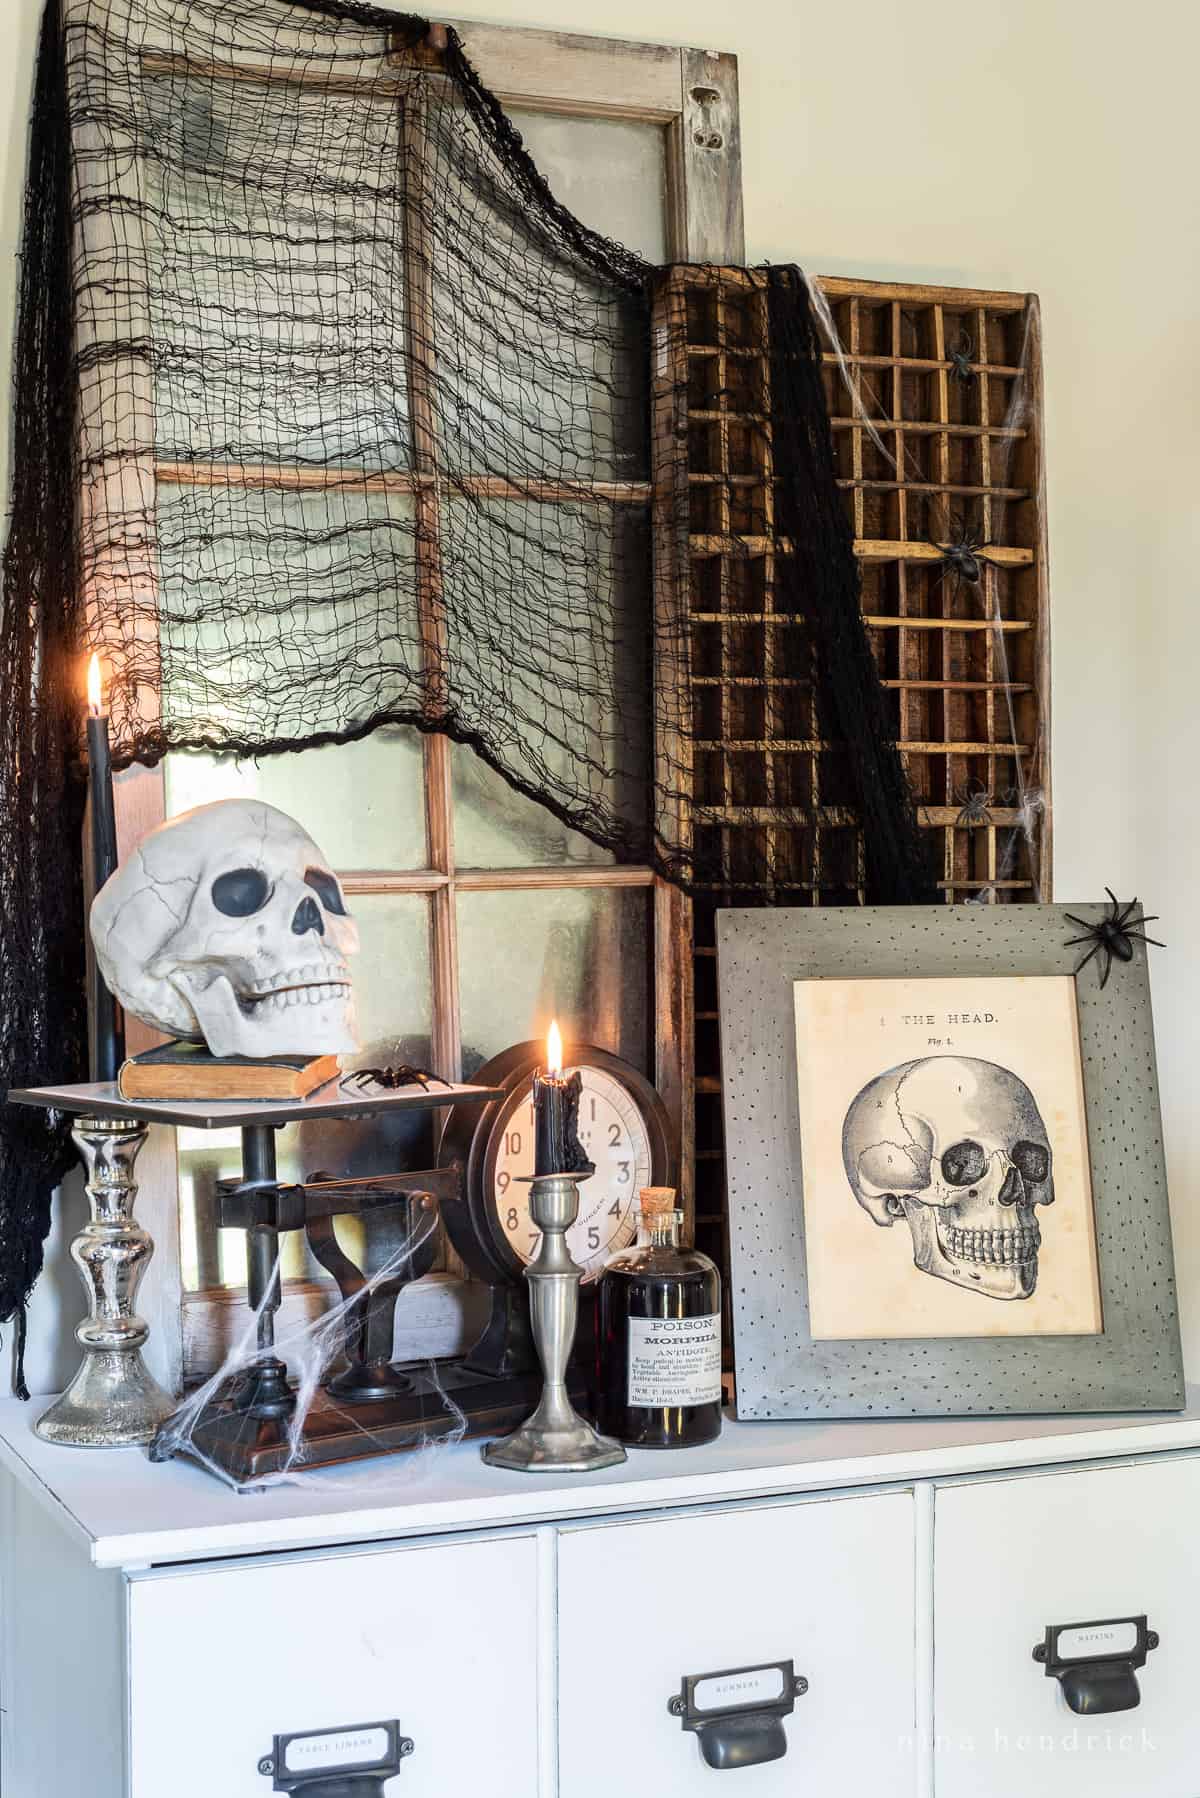 Looking for Halloween decorating ideas? Check out this black dresser adorned with spooky skulls and flickering candles.